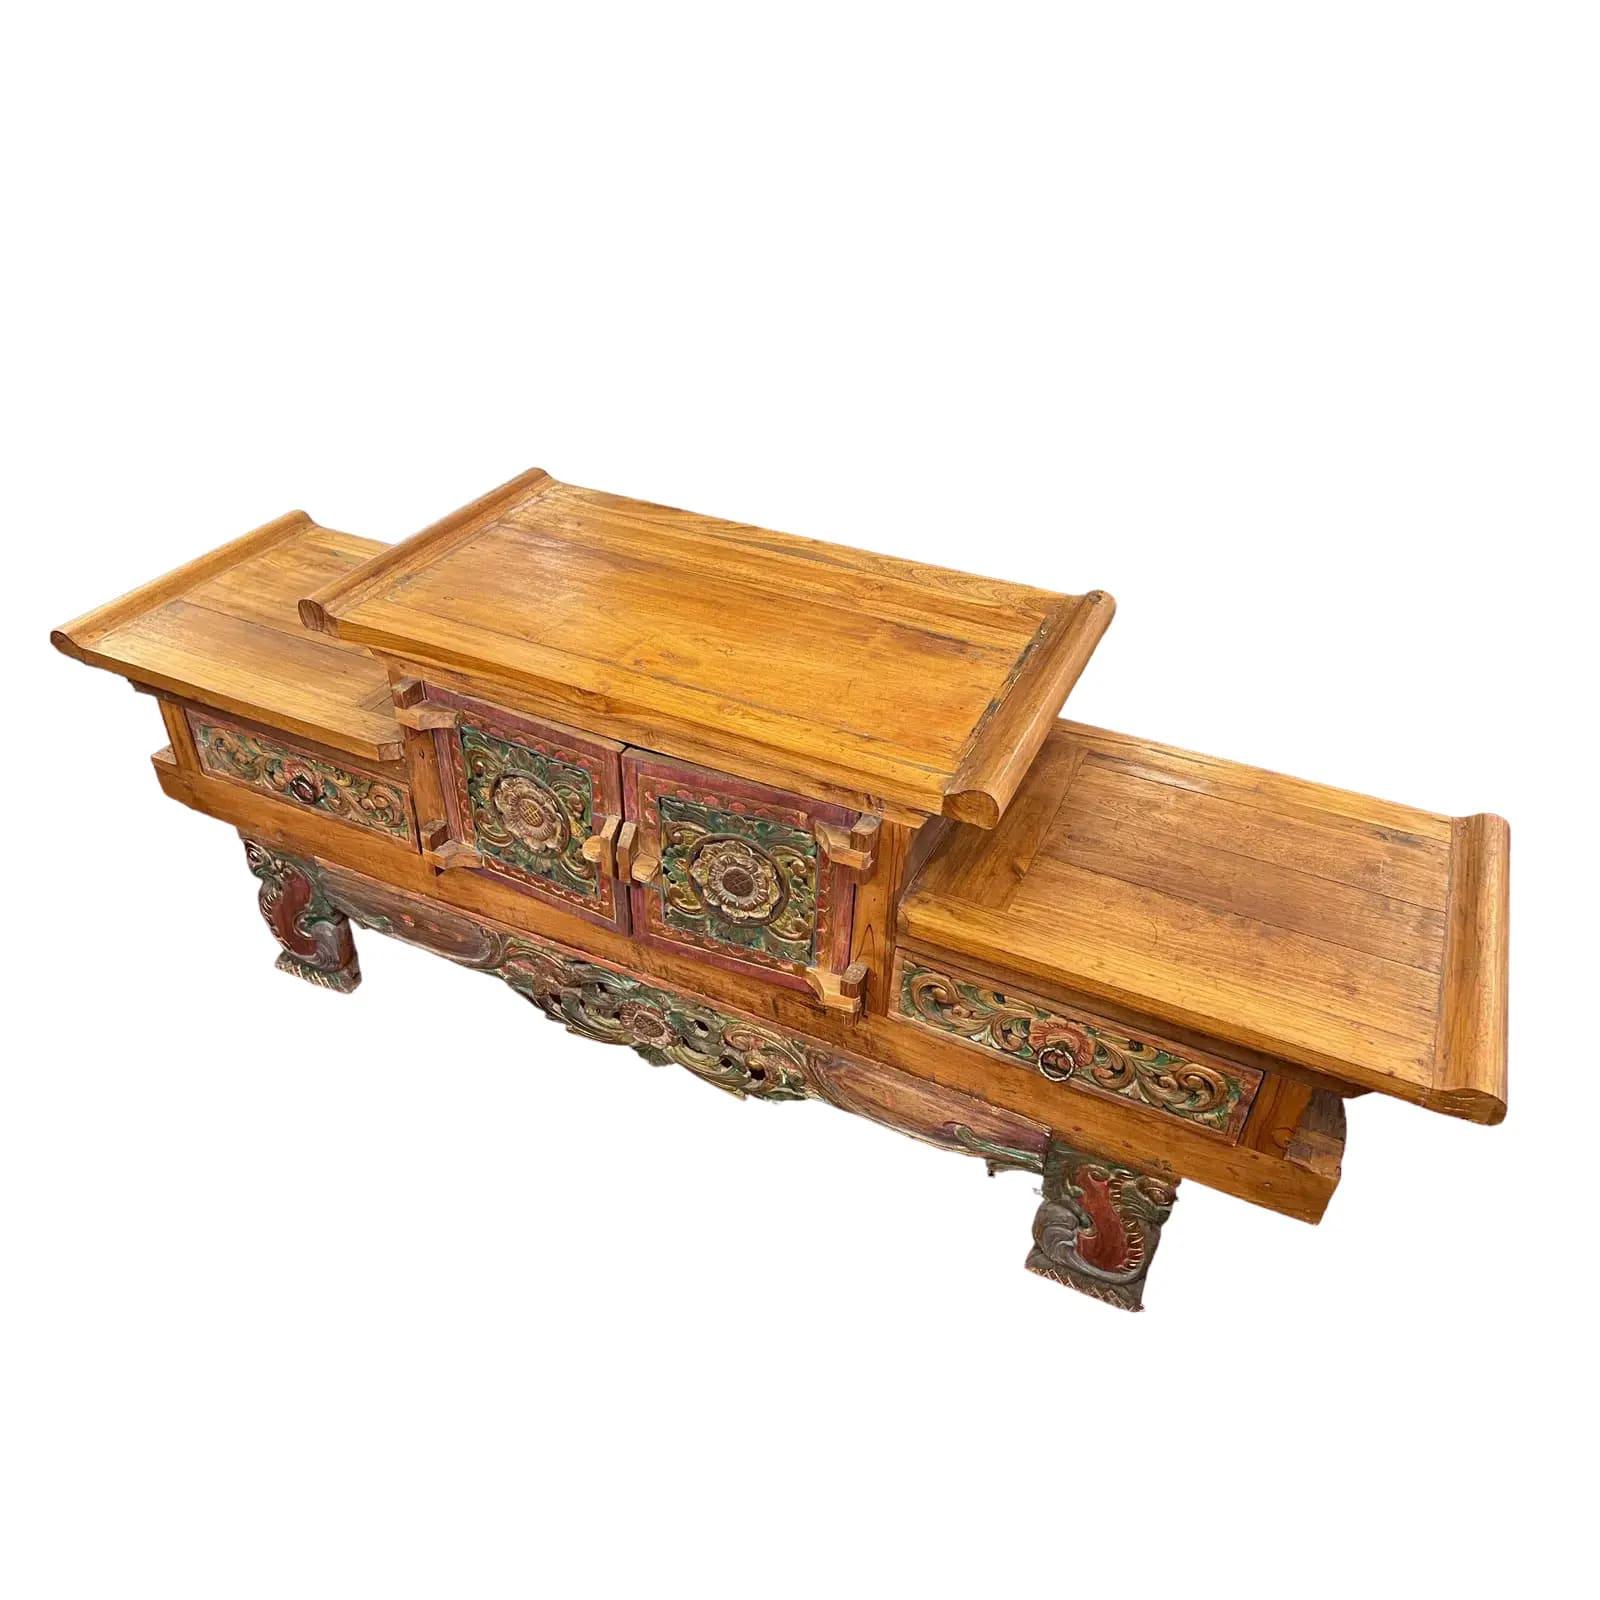 Balinese Hand-Carved Teak Wood Hi-Lo Cabinet, a magnificent piece crafted in the timeless antique altar style. This exquisite cabinet showcases the rich cultural heritage and skilled craftsmanship of Bali, Indonesia.

The cabinet is meticulously